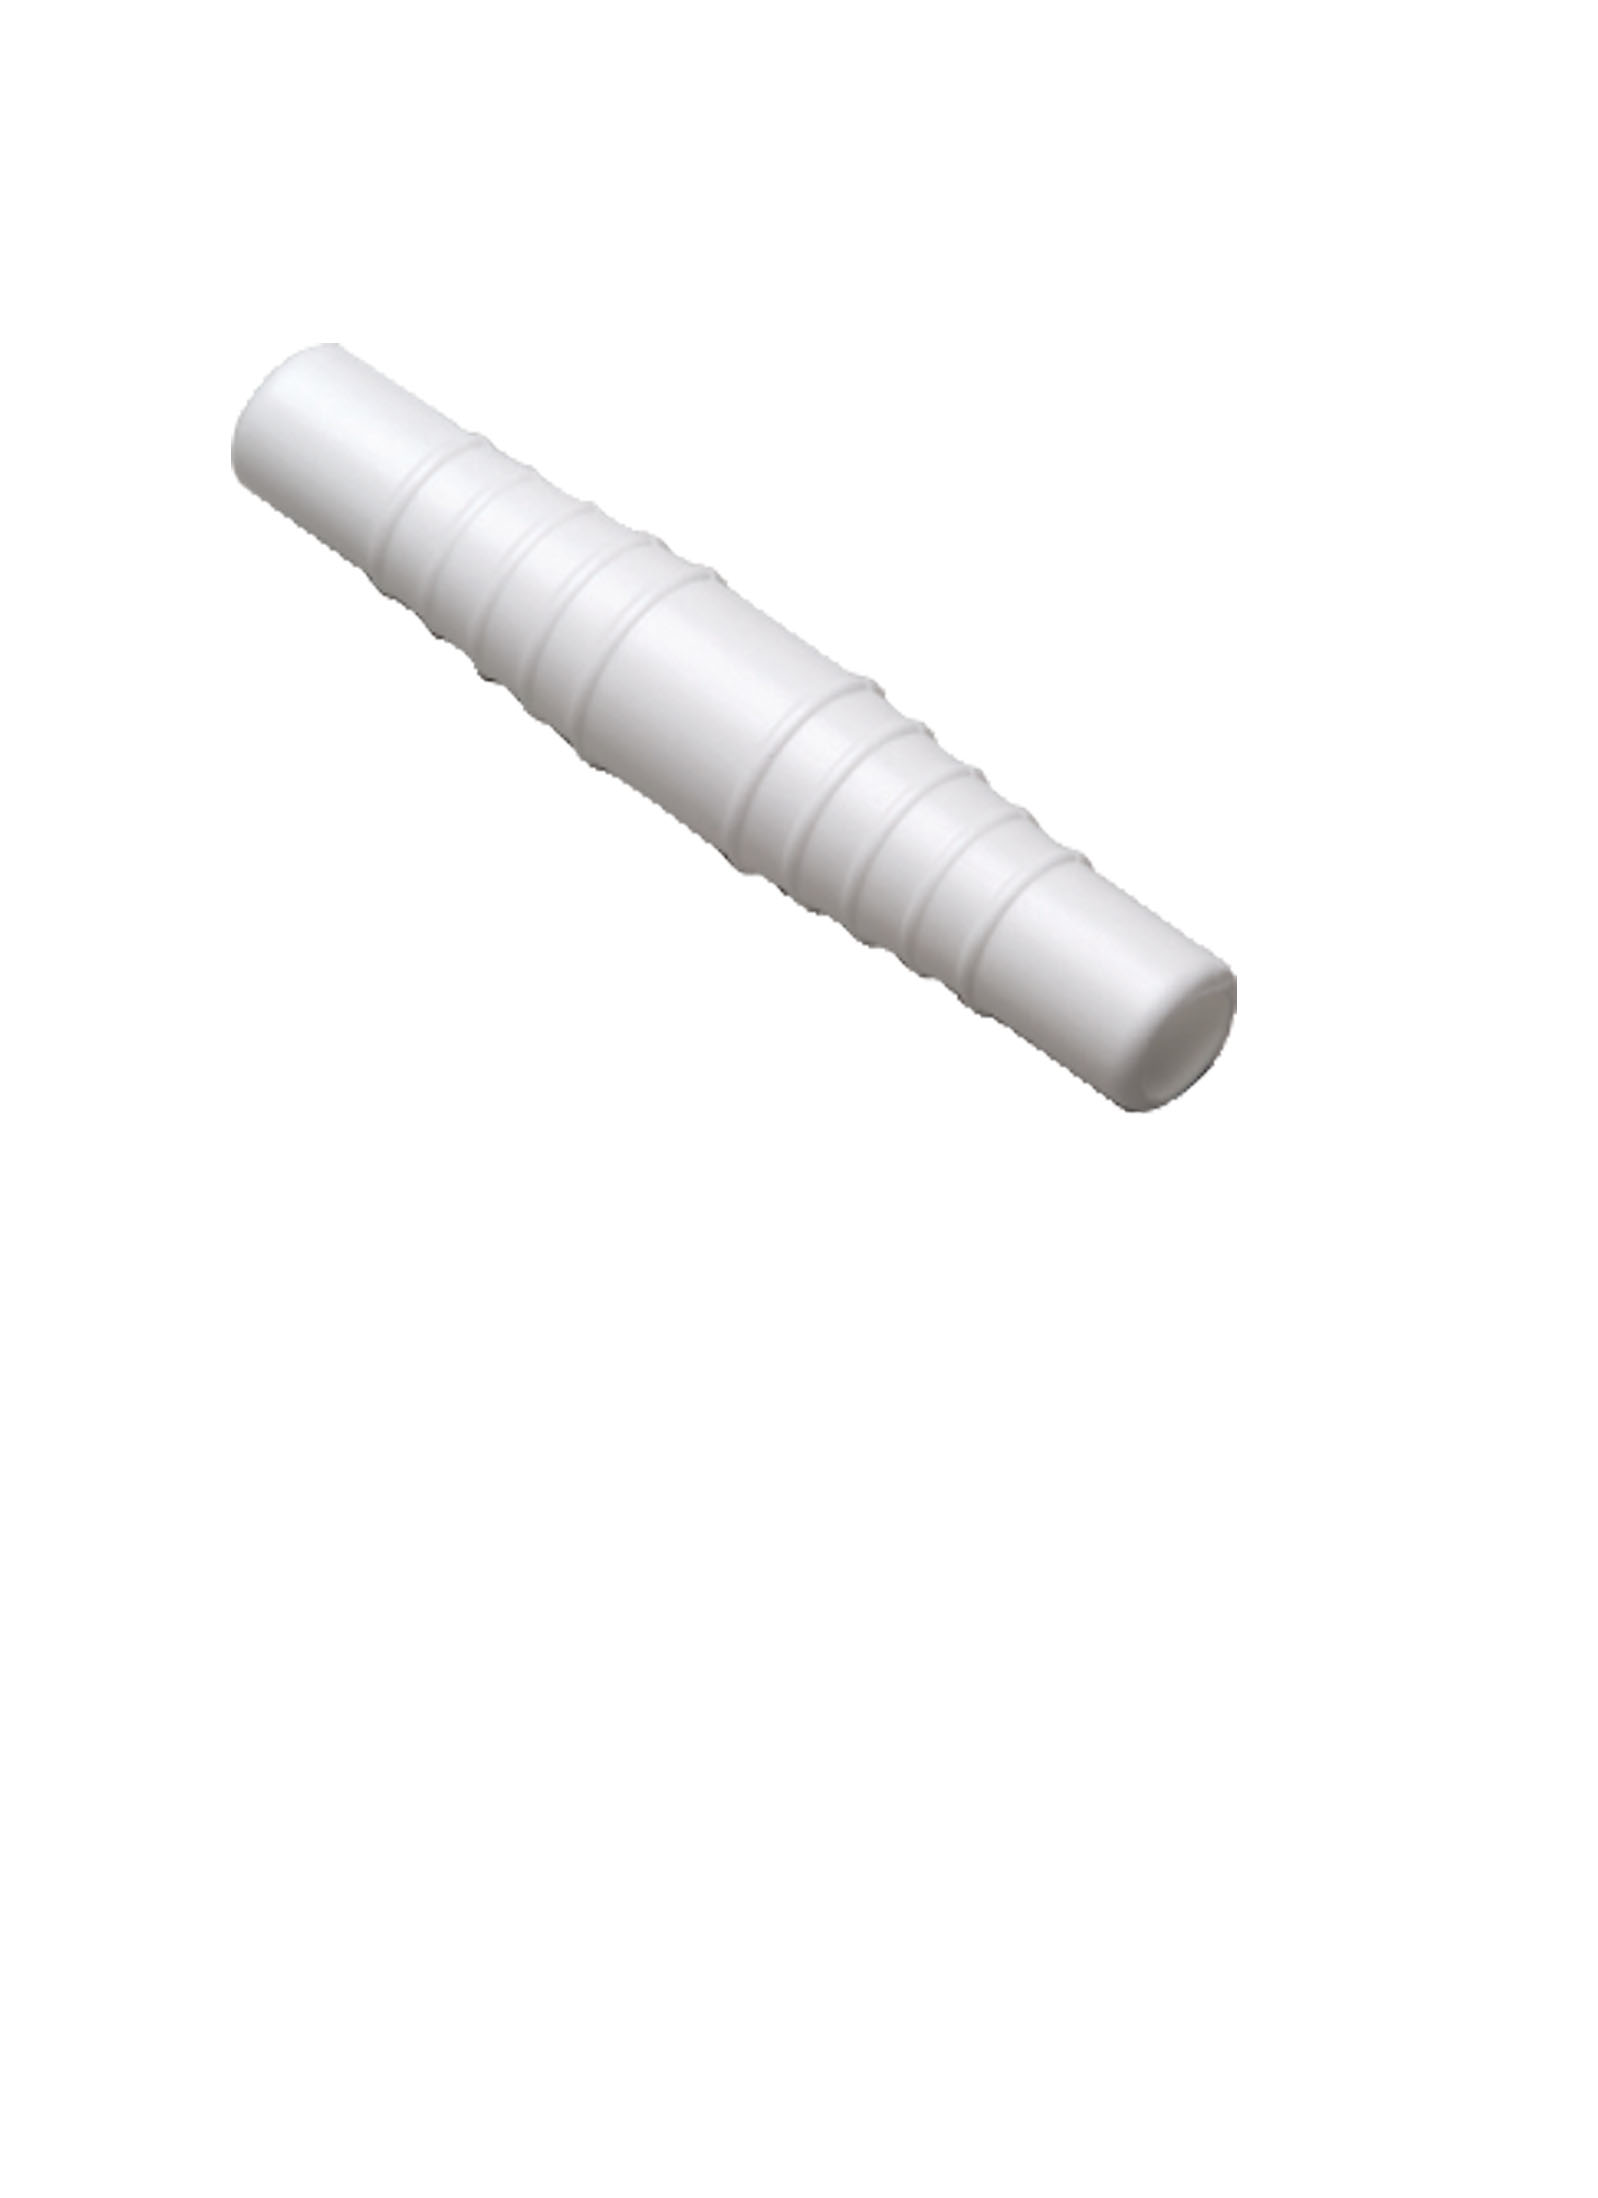 Hose Connector 175101 - LINERS